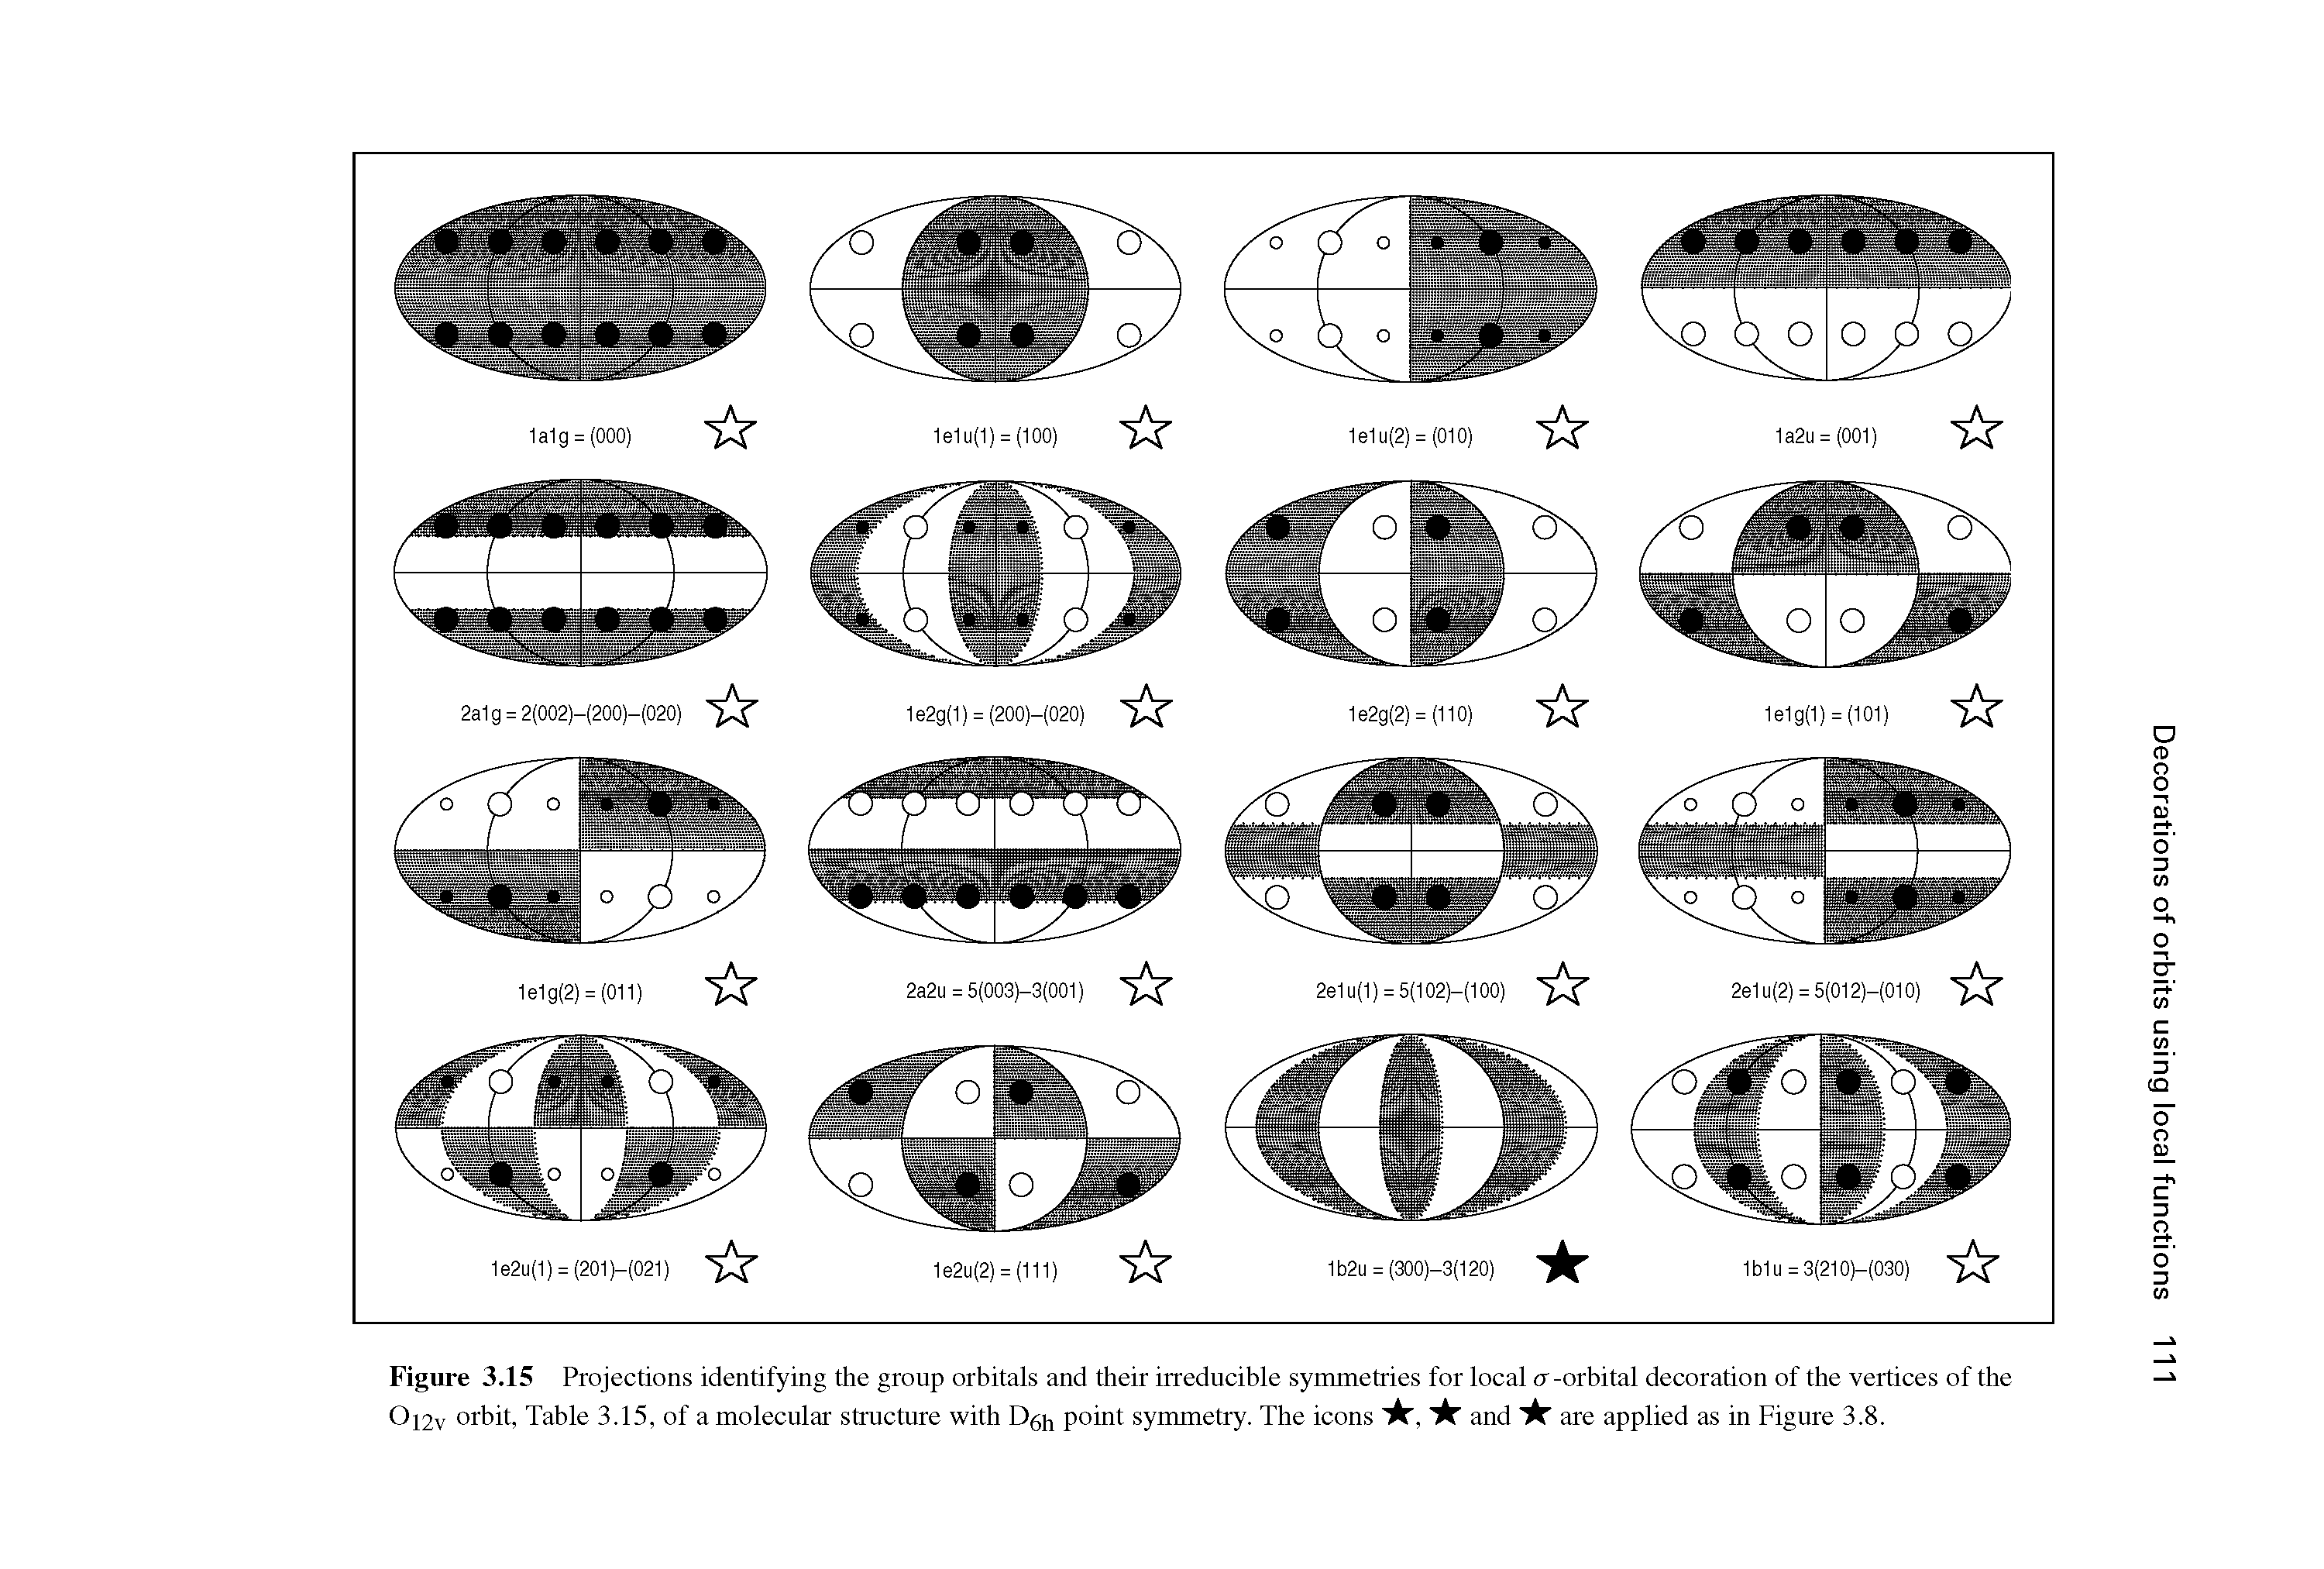 Figure 3.15 Projections identifying the group orbitals and their irreducible symmetries for local o -orbital decoration of the vertices of the Oi2v orbit, Table 3.15, of a molecular structure with point symmetry. The icons "A", and are applied as in Figure 3.8.